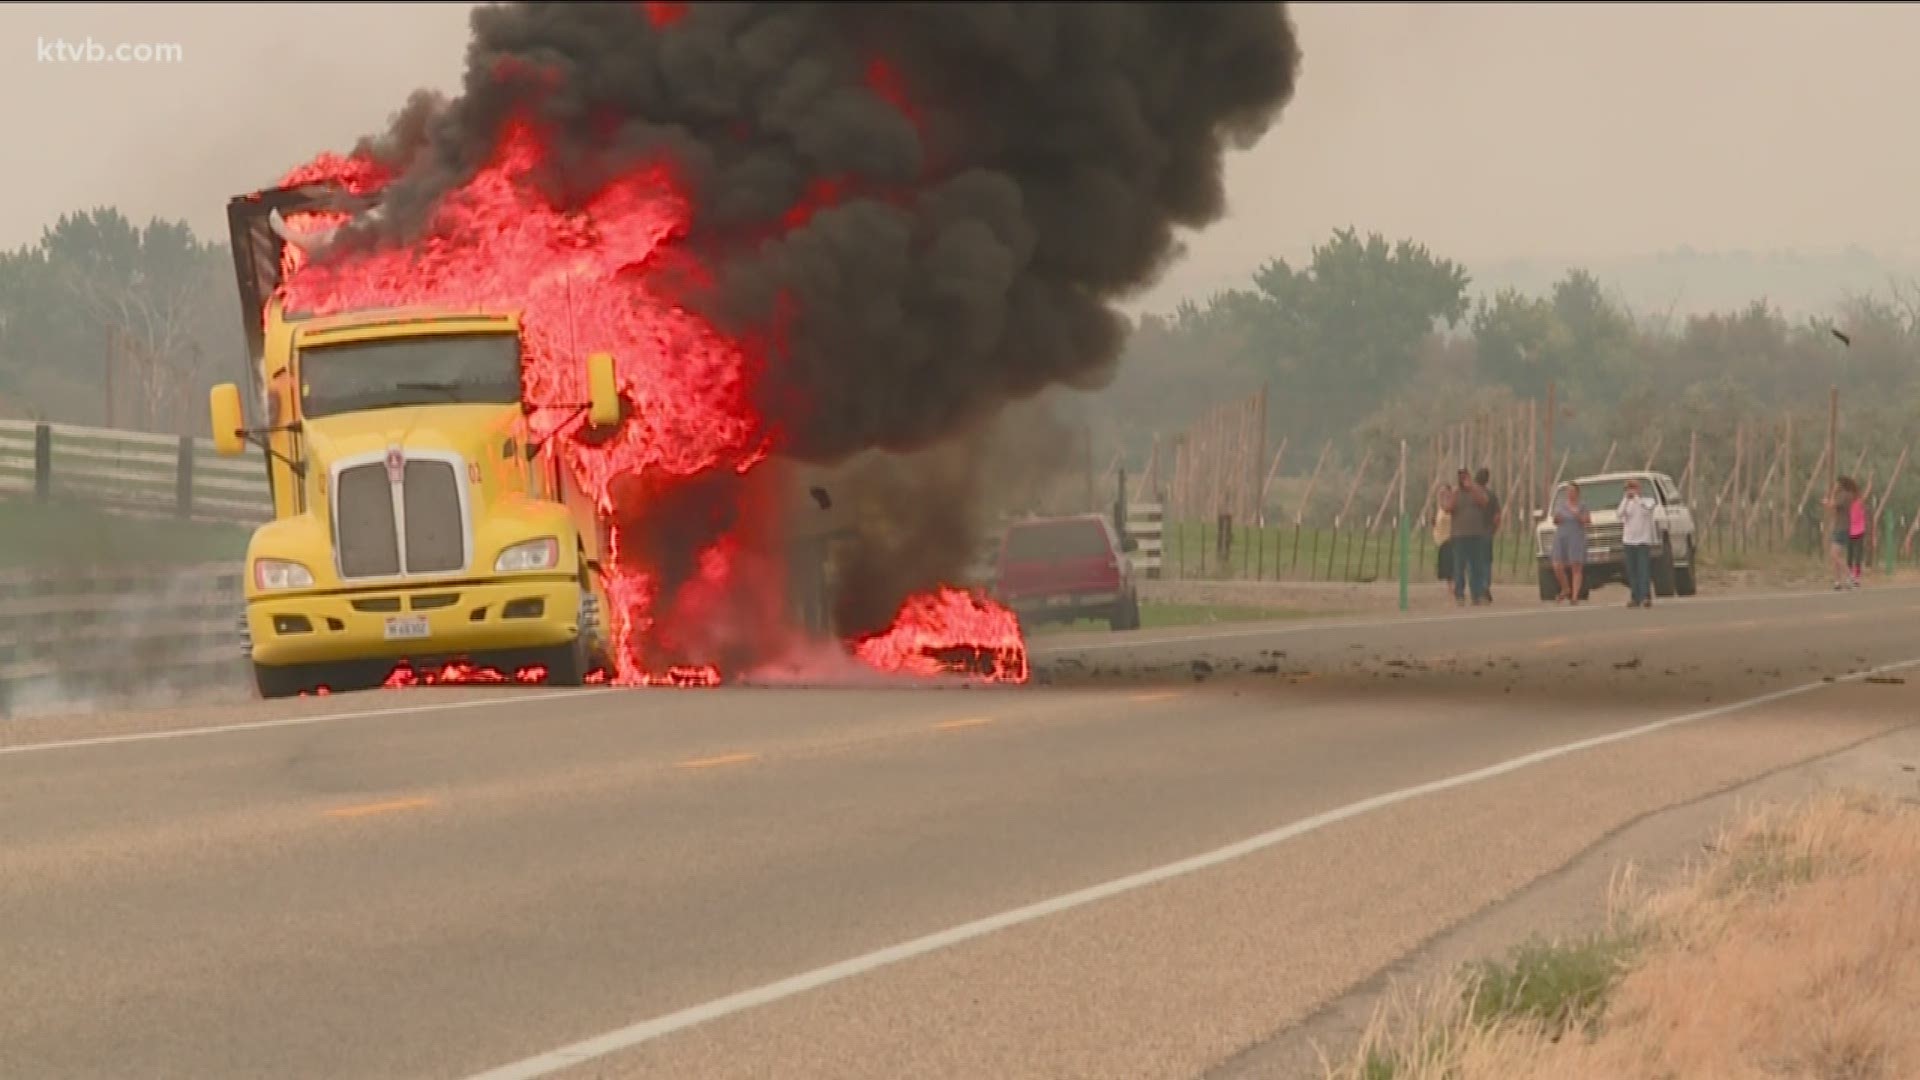 The driver noticed people were flagging him down and  pulled over. That's when he saw the smoke coming from his truck.